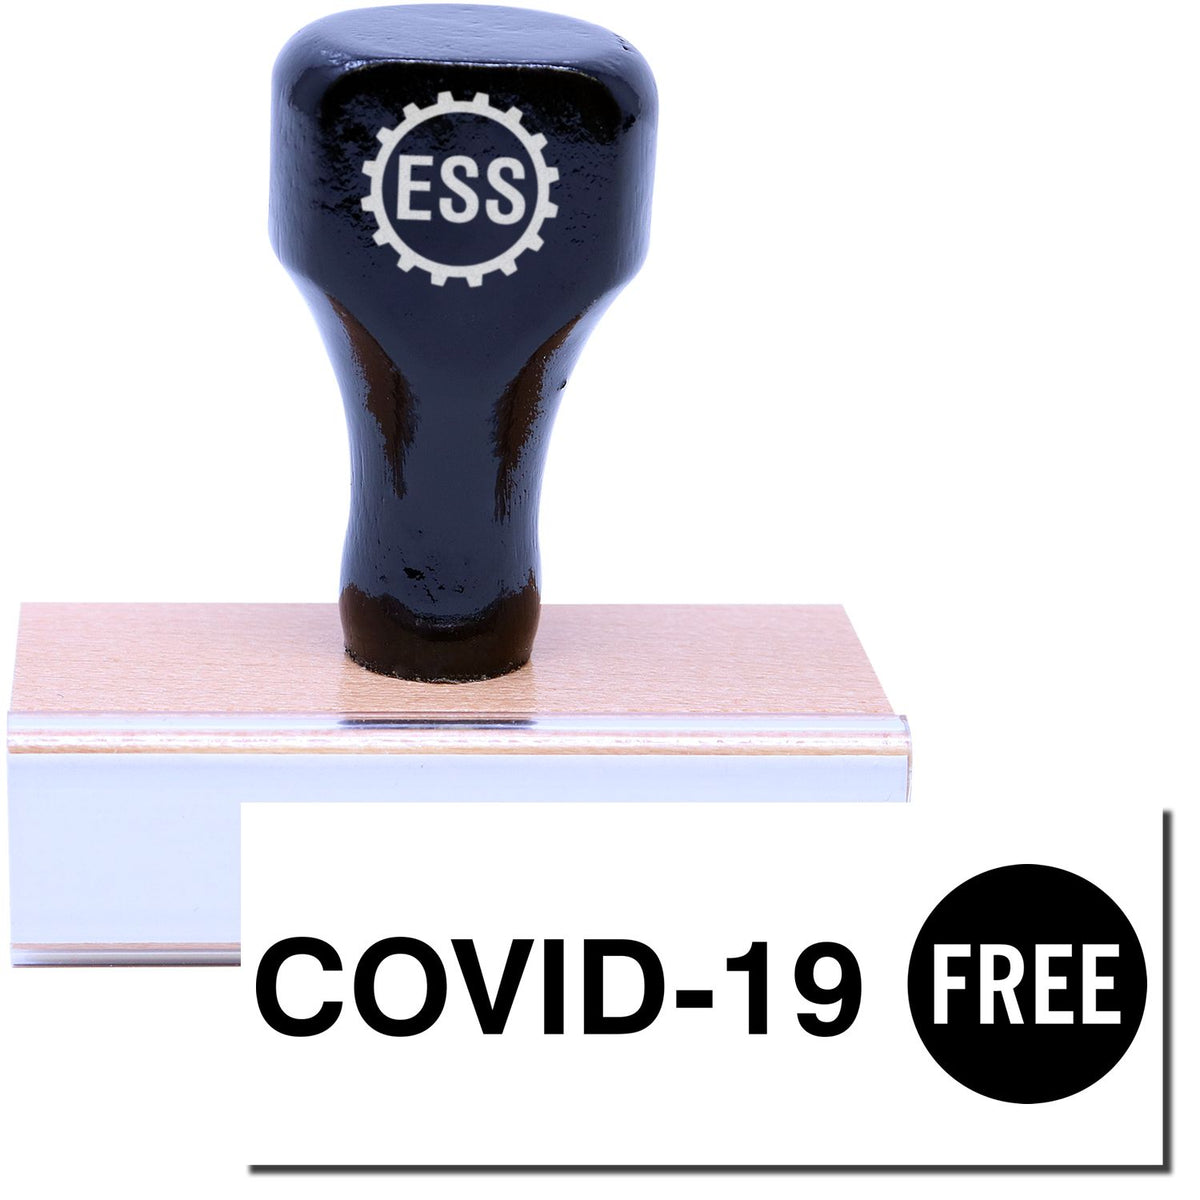 A stock office rubber stamp with a stamped image showing how the text &quot;COVID-19 FREE&quot; is displayed after stamping.